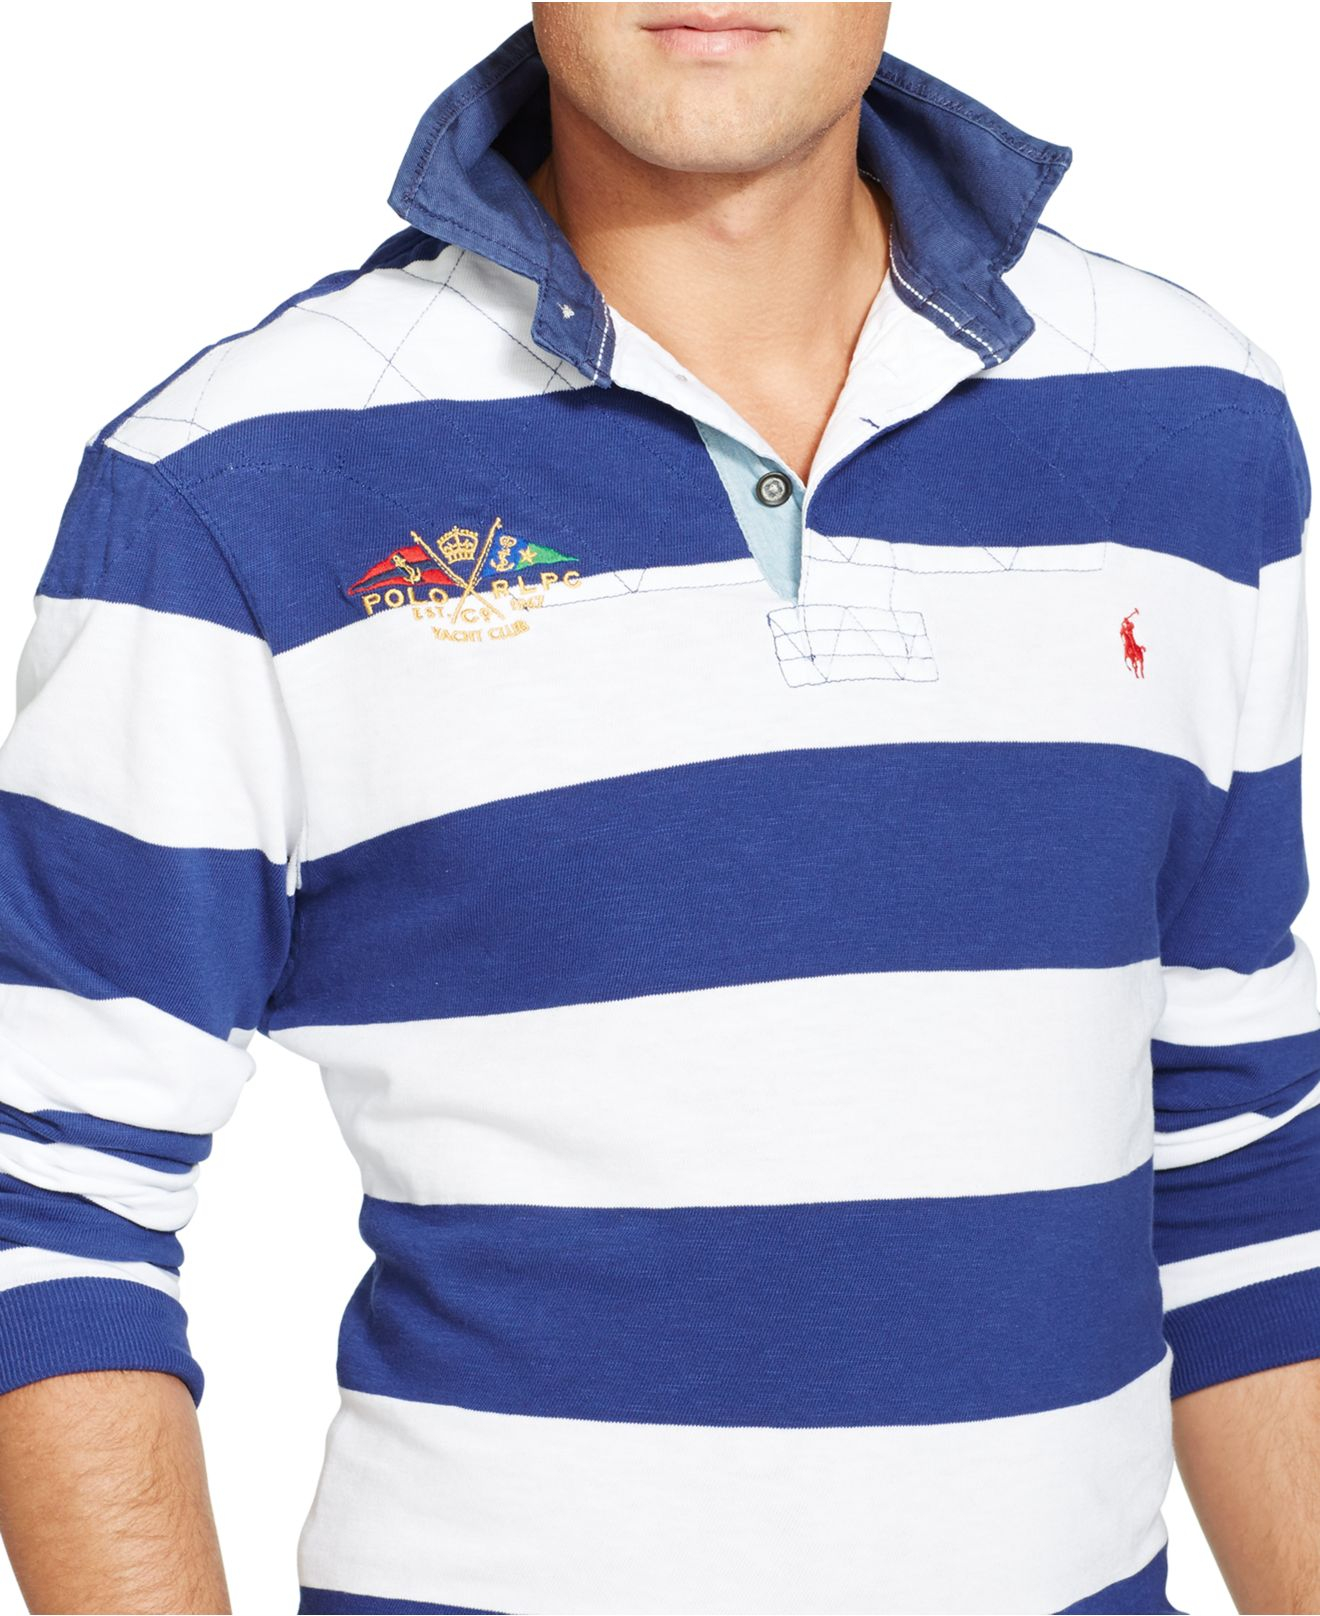 Lyst - Polo Ralph Lauren Big And Tall Varsity Jersey Rugby Shirt in ...